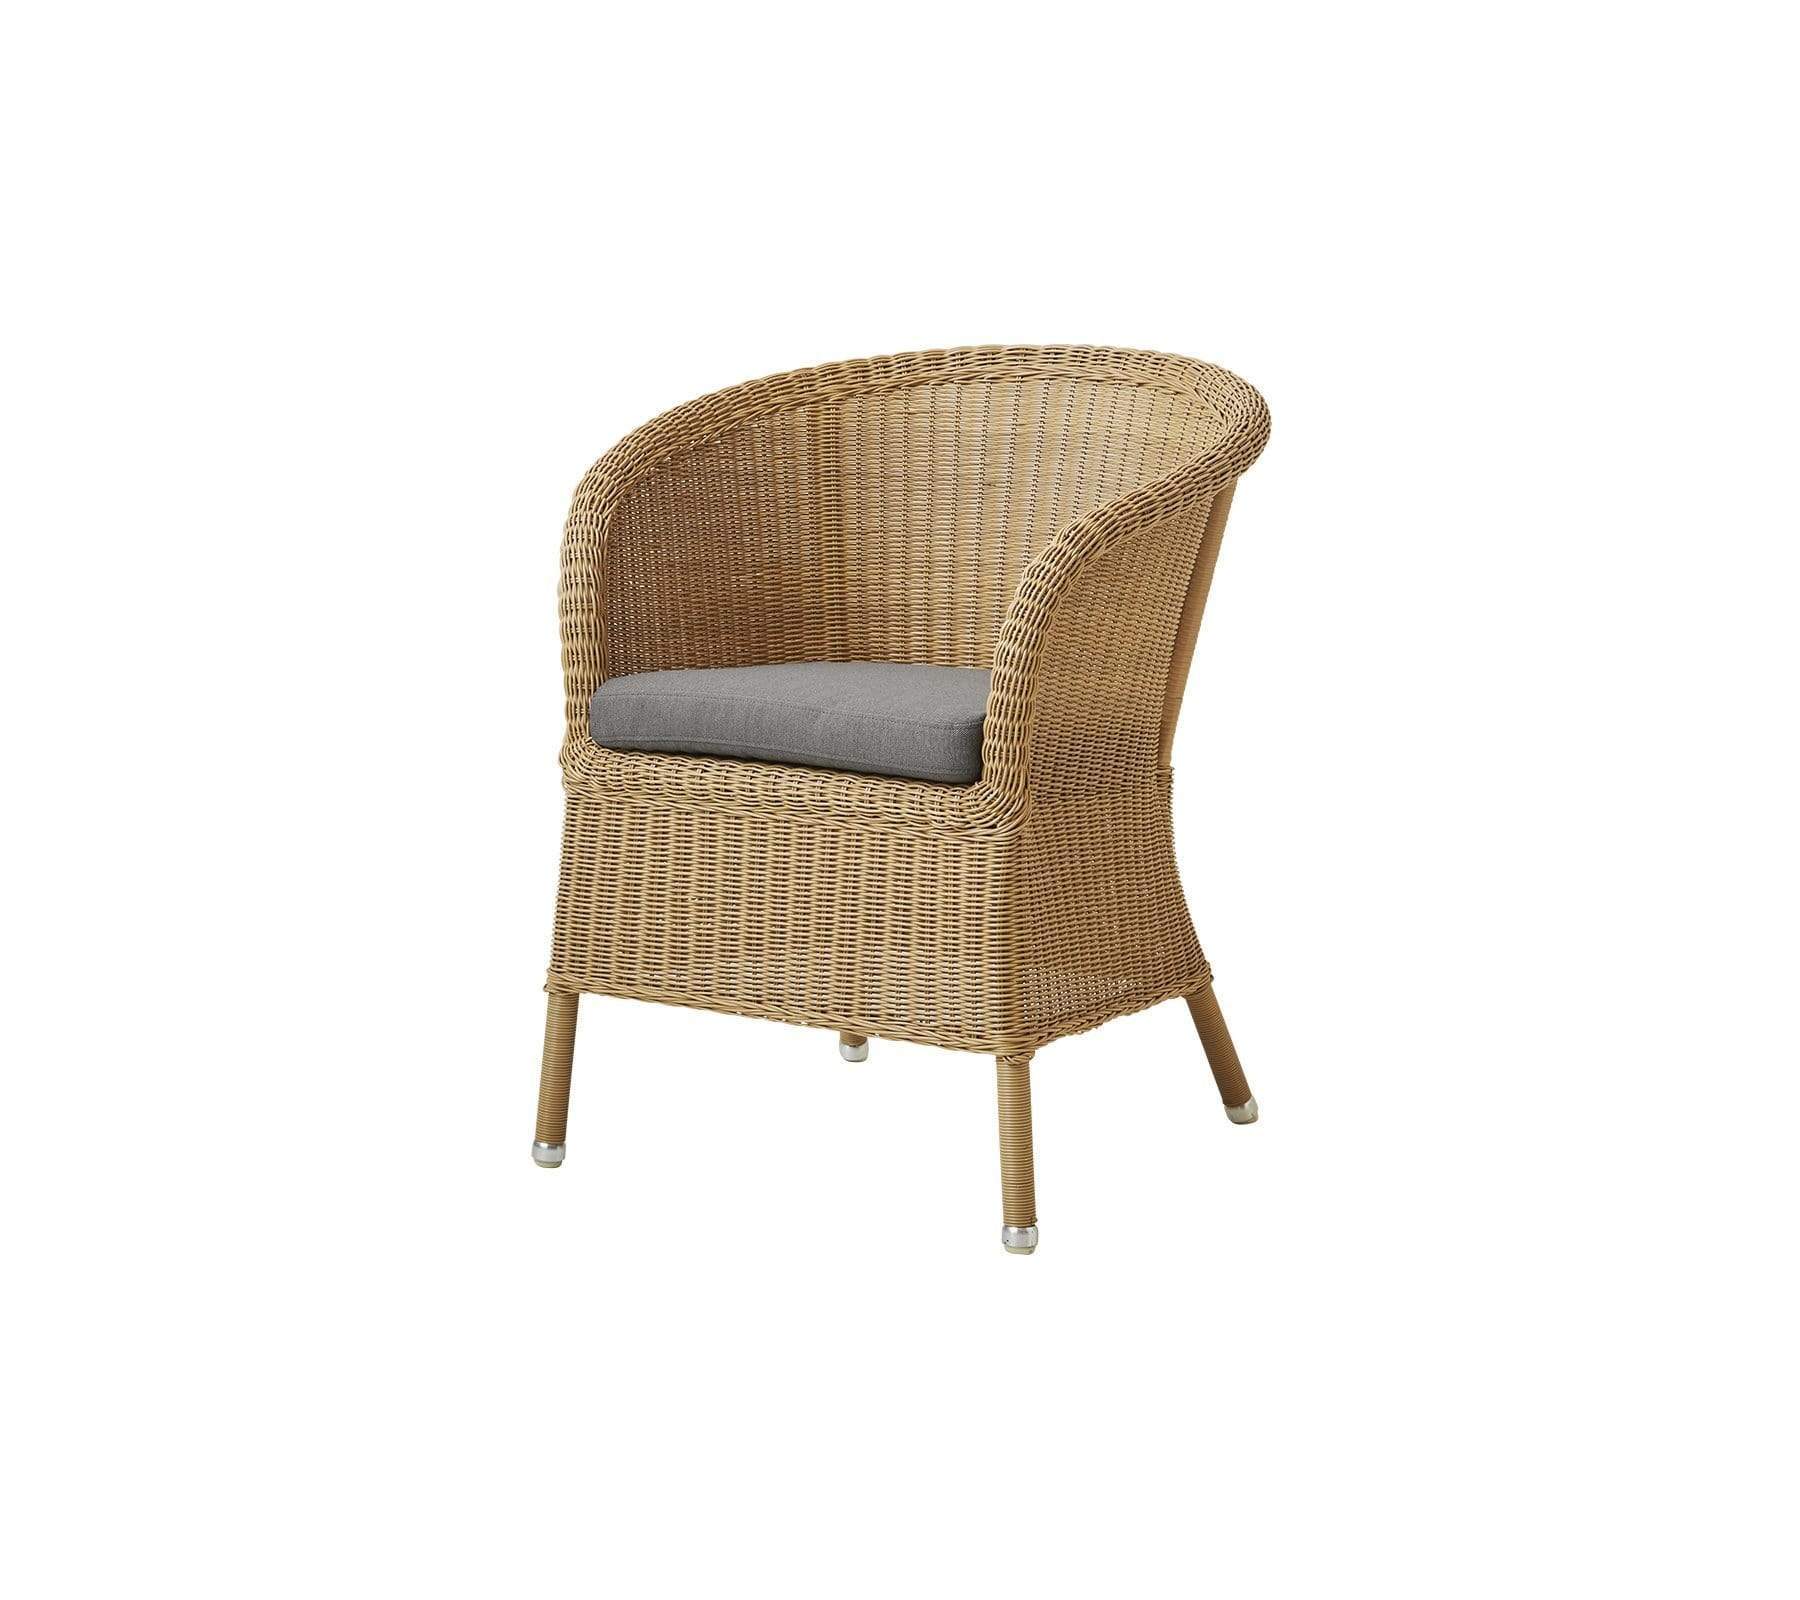 Boxhill's Derby Outdoor Dining Armchair with grey seat cushion